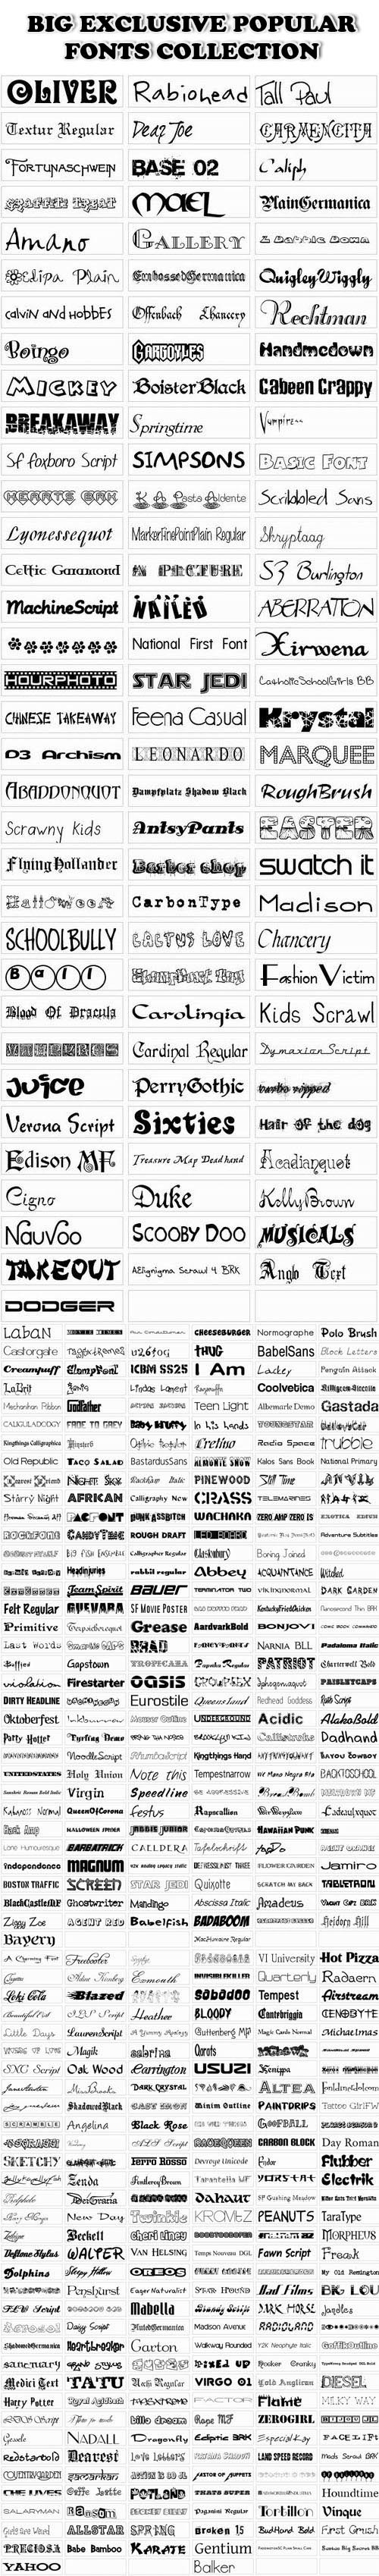 Big Exclusive Popular Fonts Collection